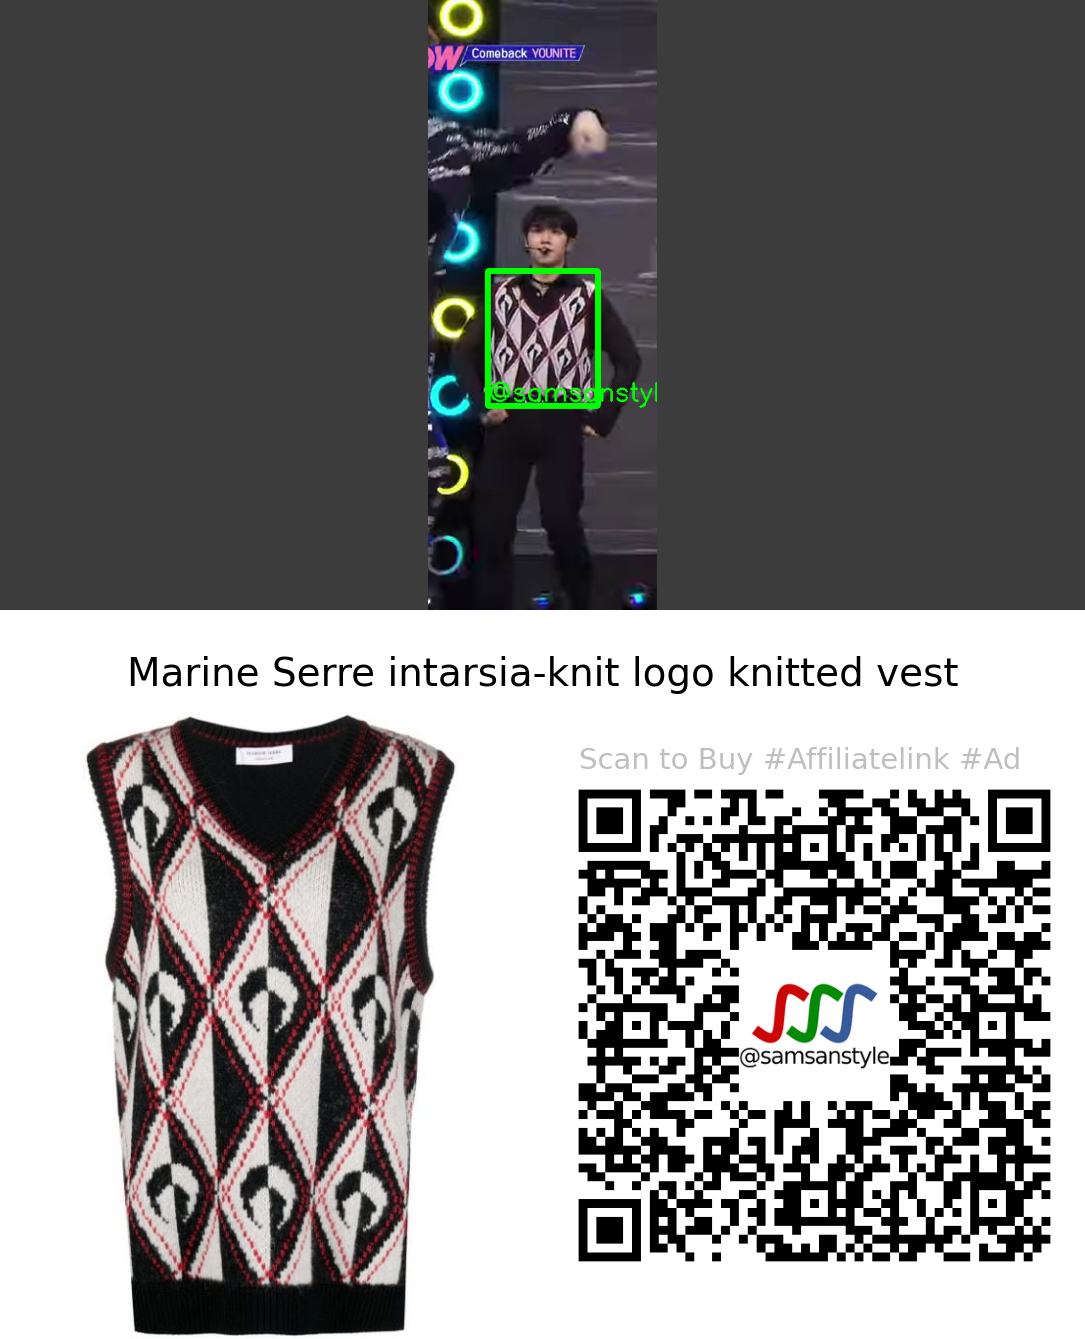 YOUNITE Eunsang | Bad Cupid SBS MTV The Show | Marine Serre intarsia-knit logo knitted vest